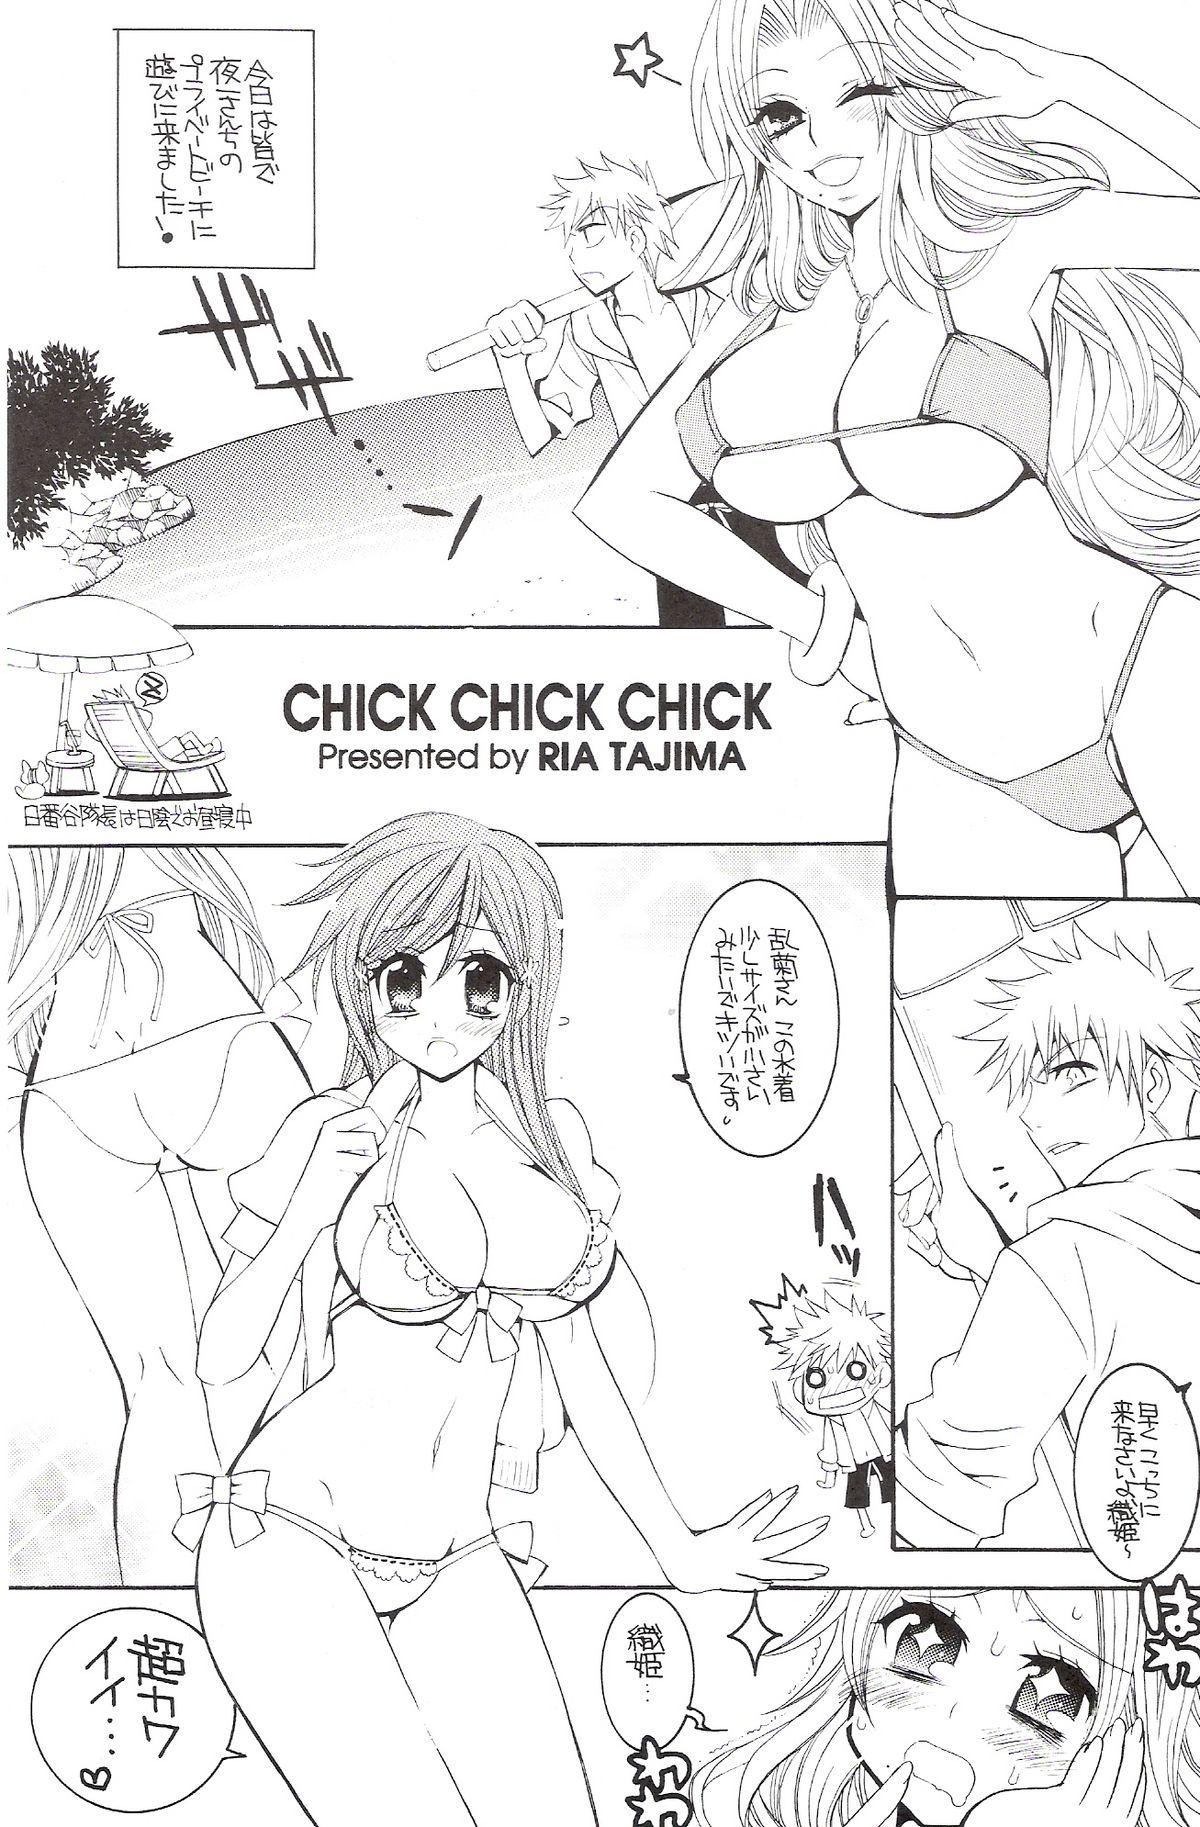 Scissoring CHICK CHICK CHICK - Bleach Dick - Page 4